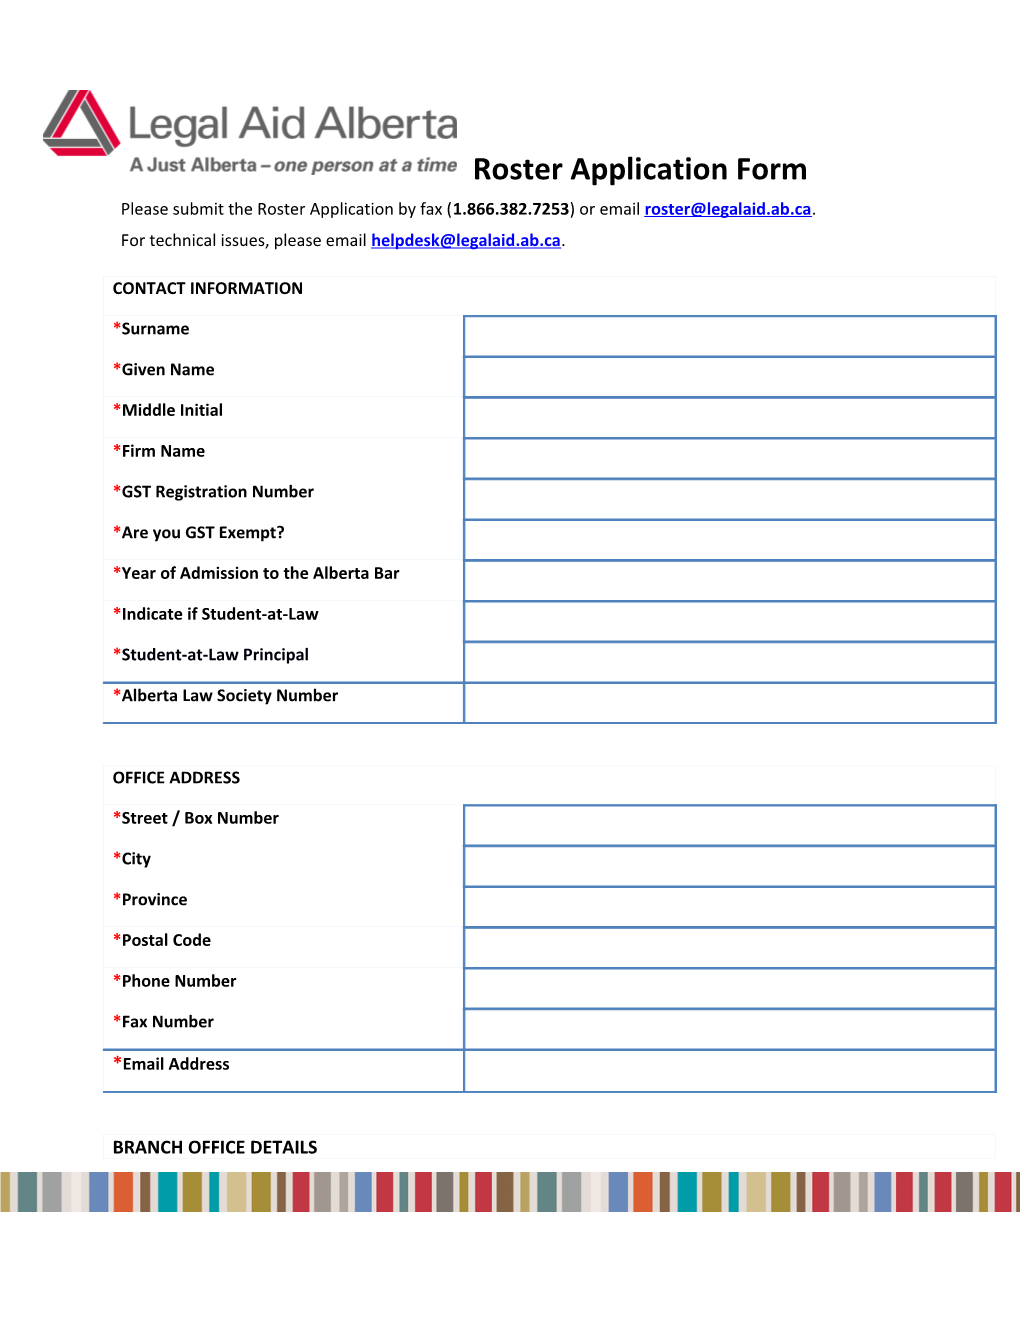 Roster Application Form Please Submit the Roster Application by Fax ( 1.866.382.7253)